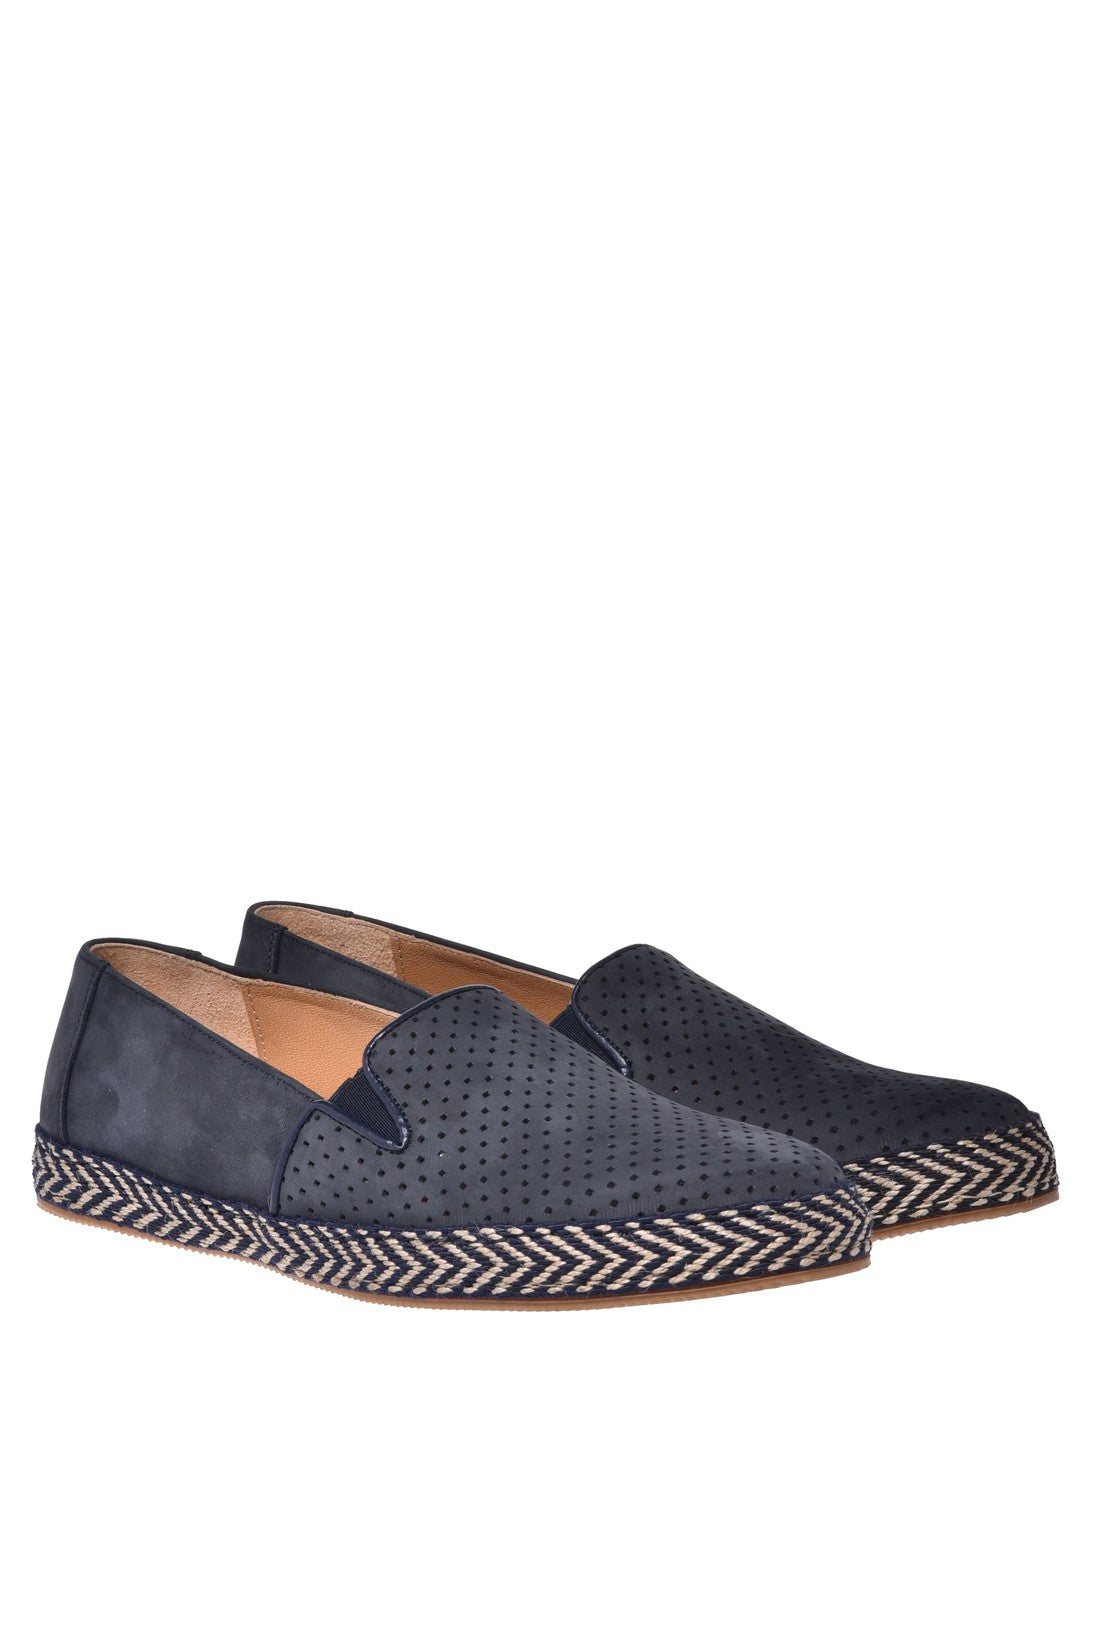 Espadrilles in taupe perforated suede